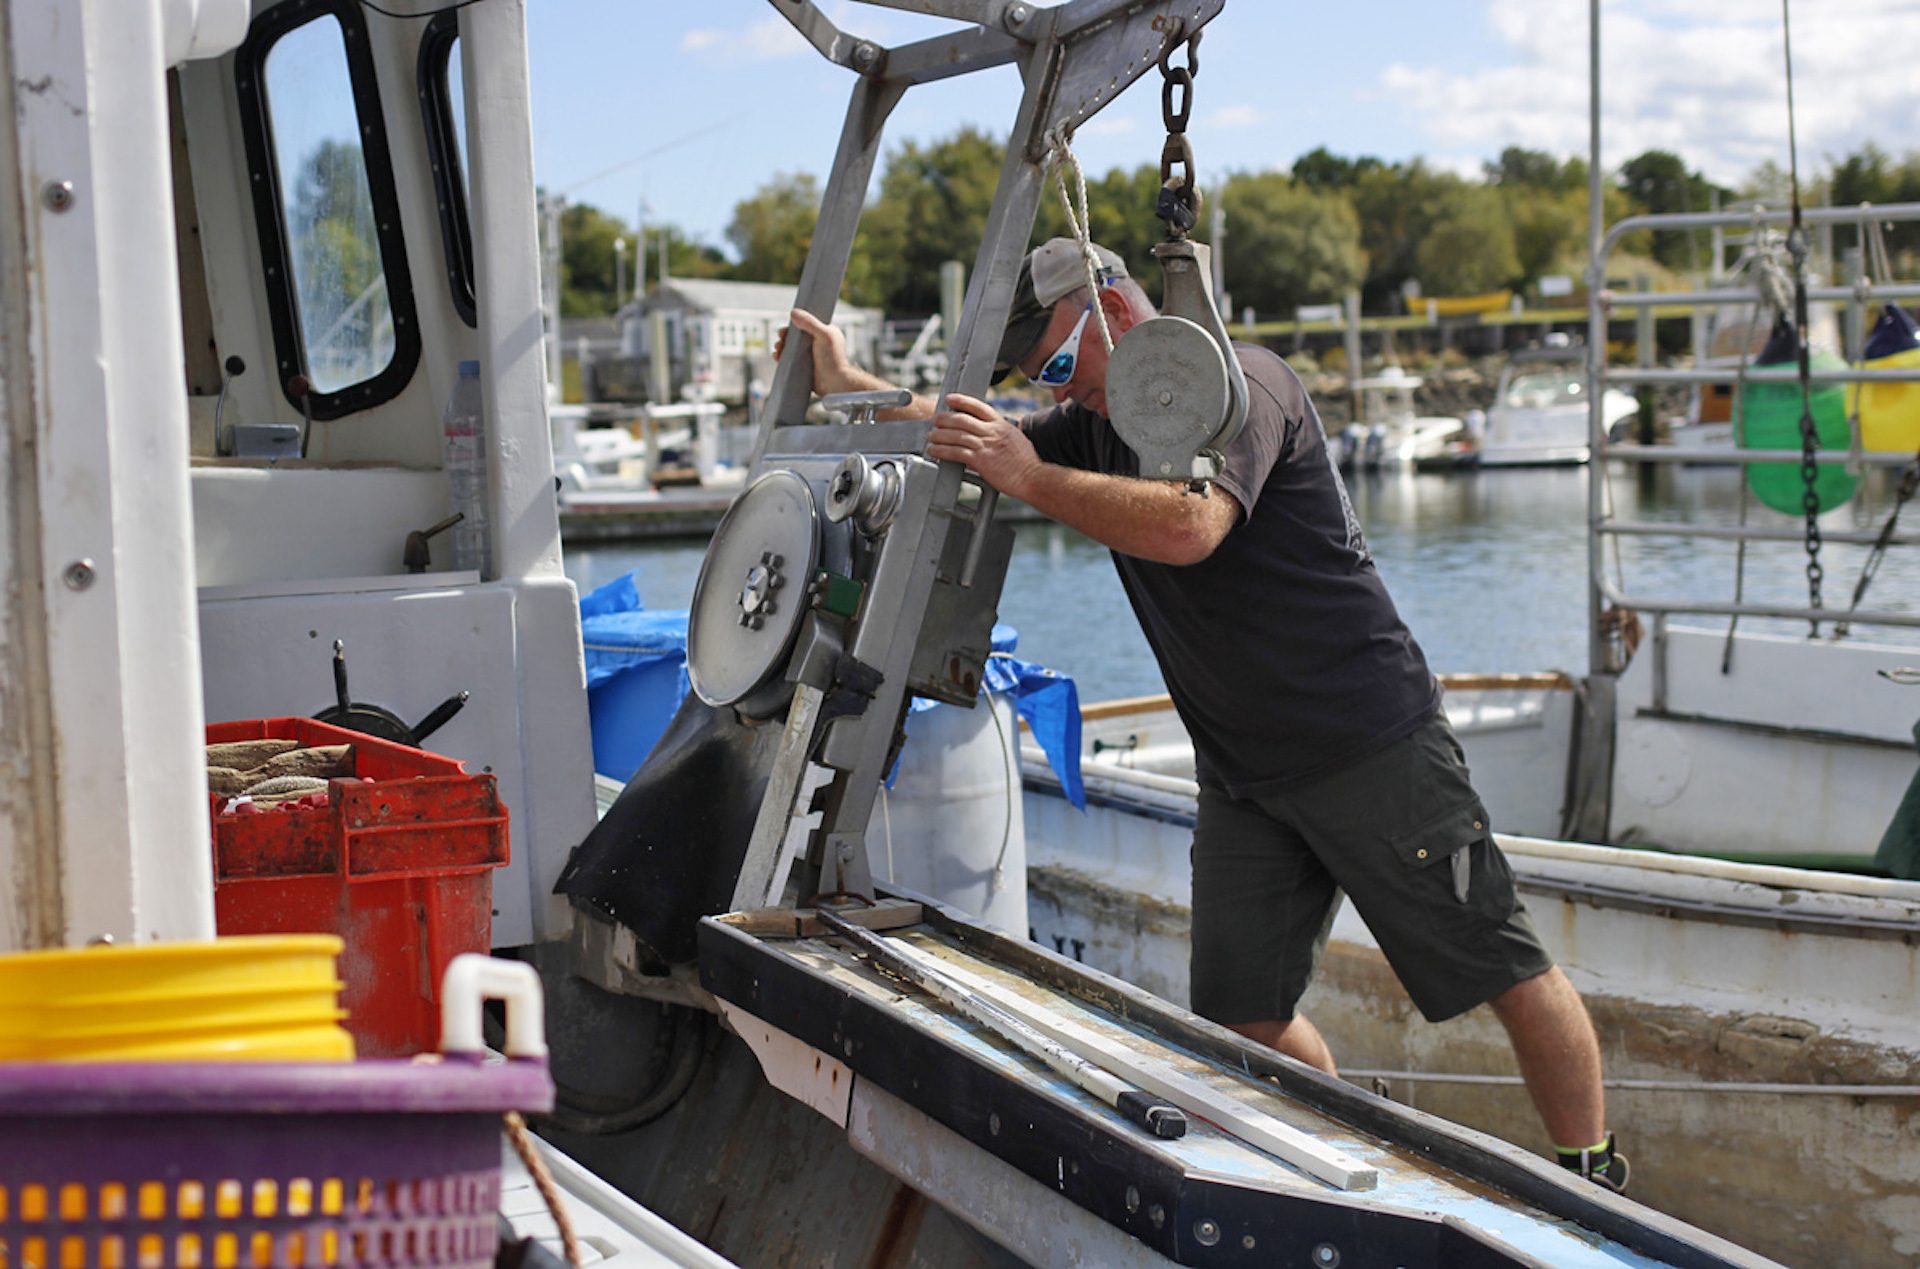 Rob Martin prepares to take his boat out to rescue a sea turtle caught in some fishing line.